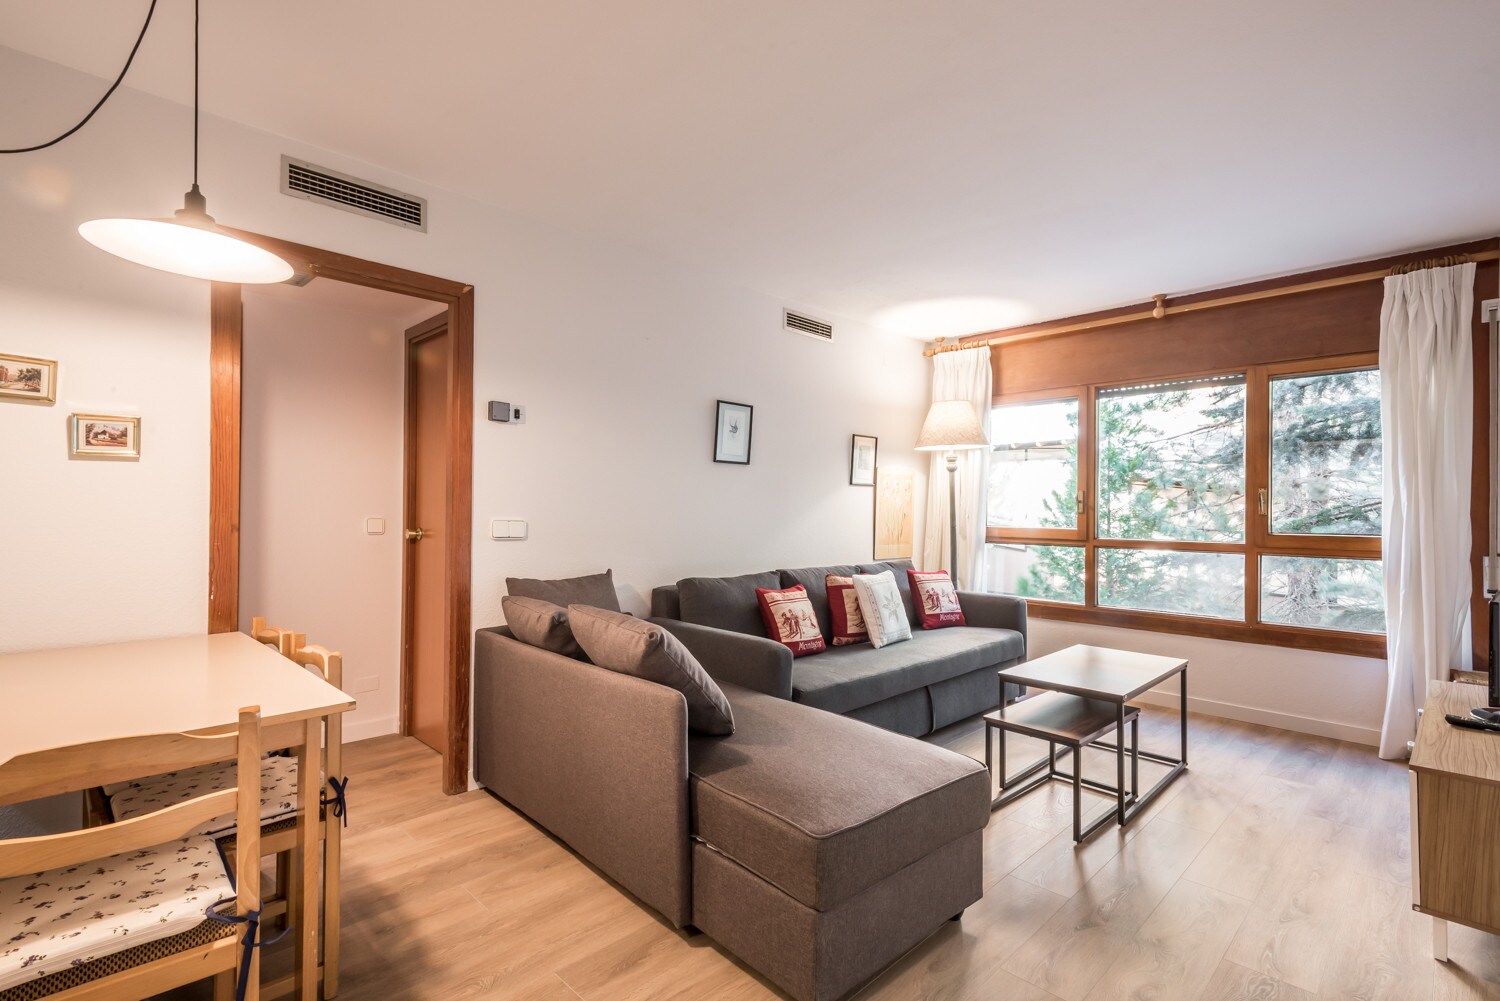 Property Image 1 - Barlongueta  apartment 1 bedrooms 5 people, in Baqueira, next to the ski chairlift at Baqueira 1500  cente